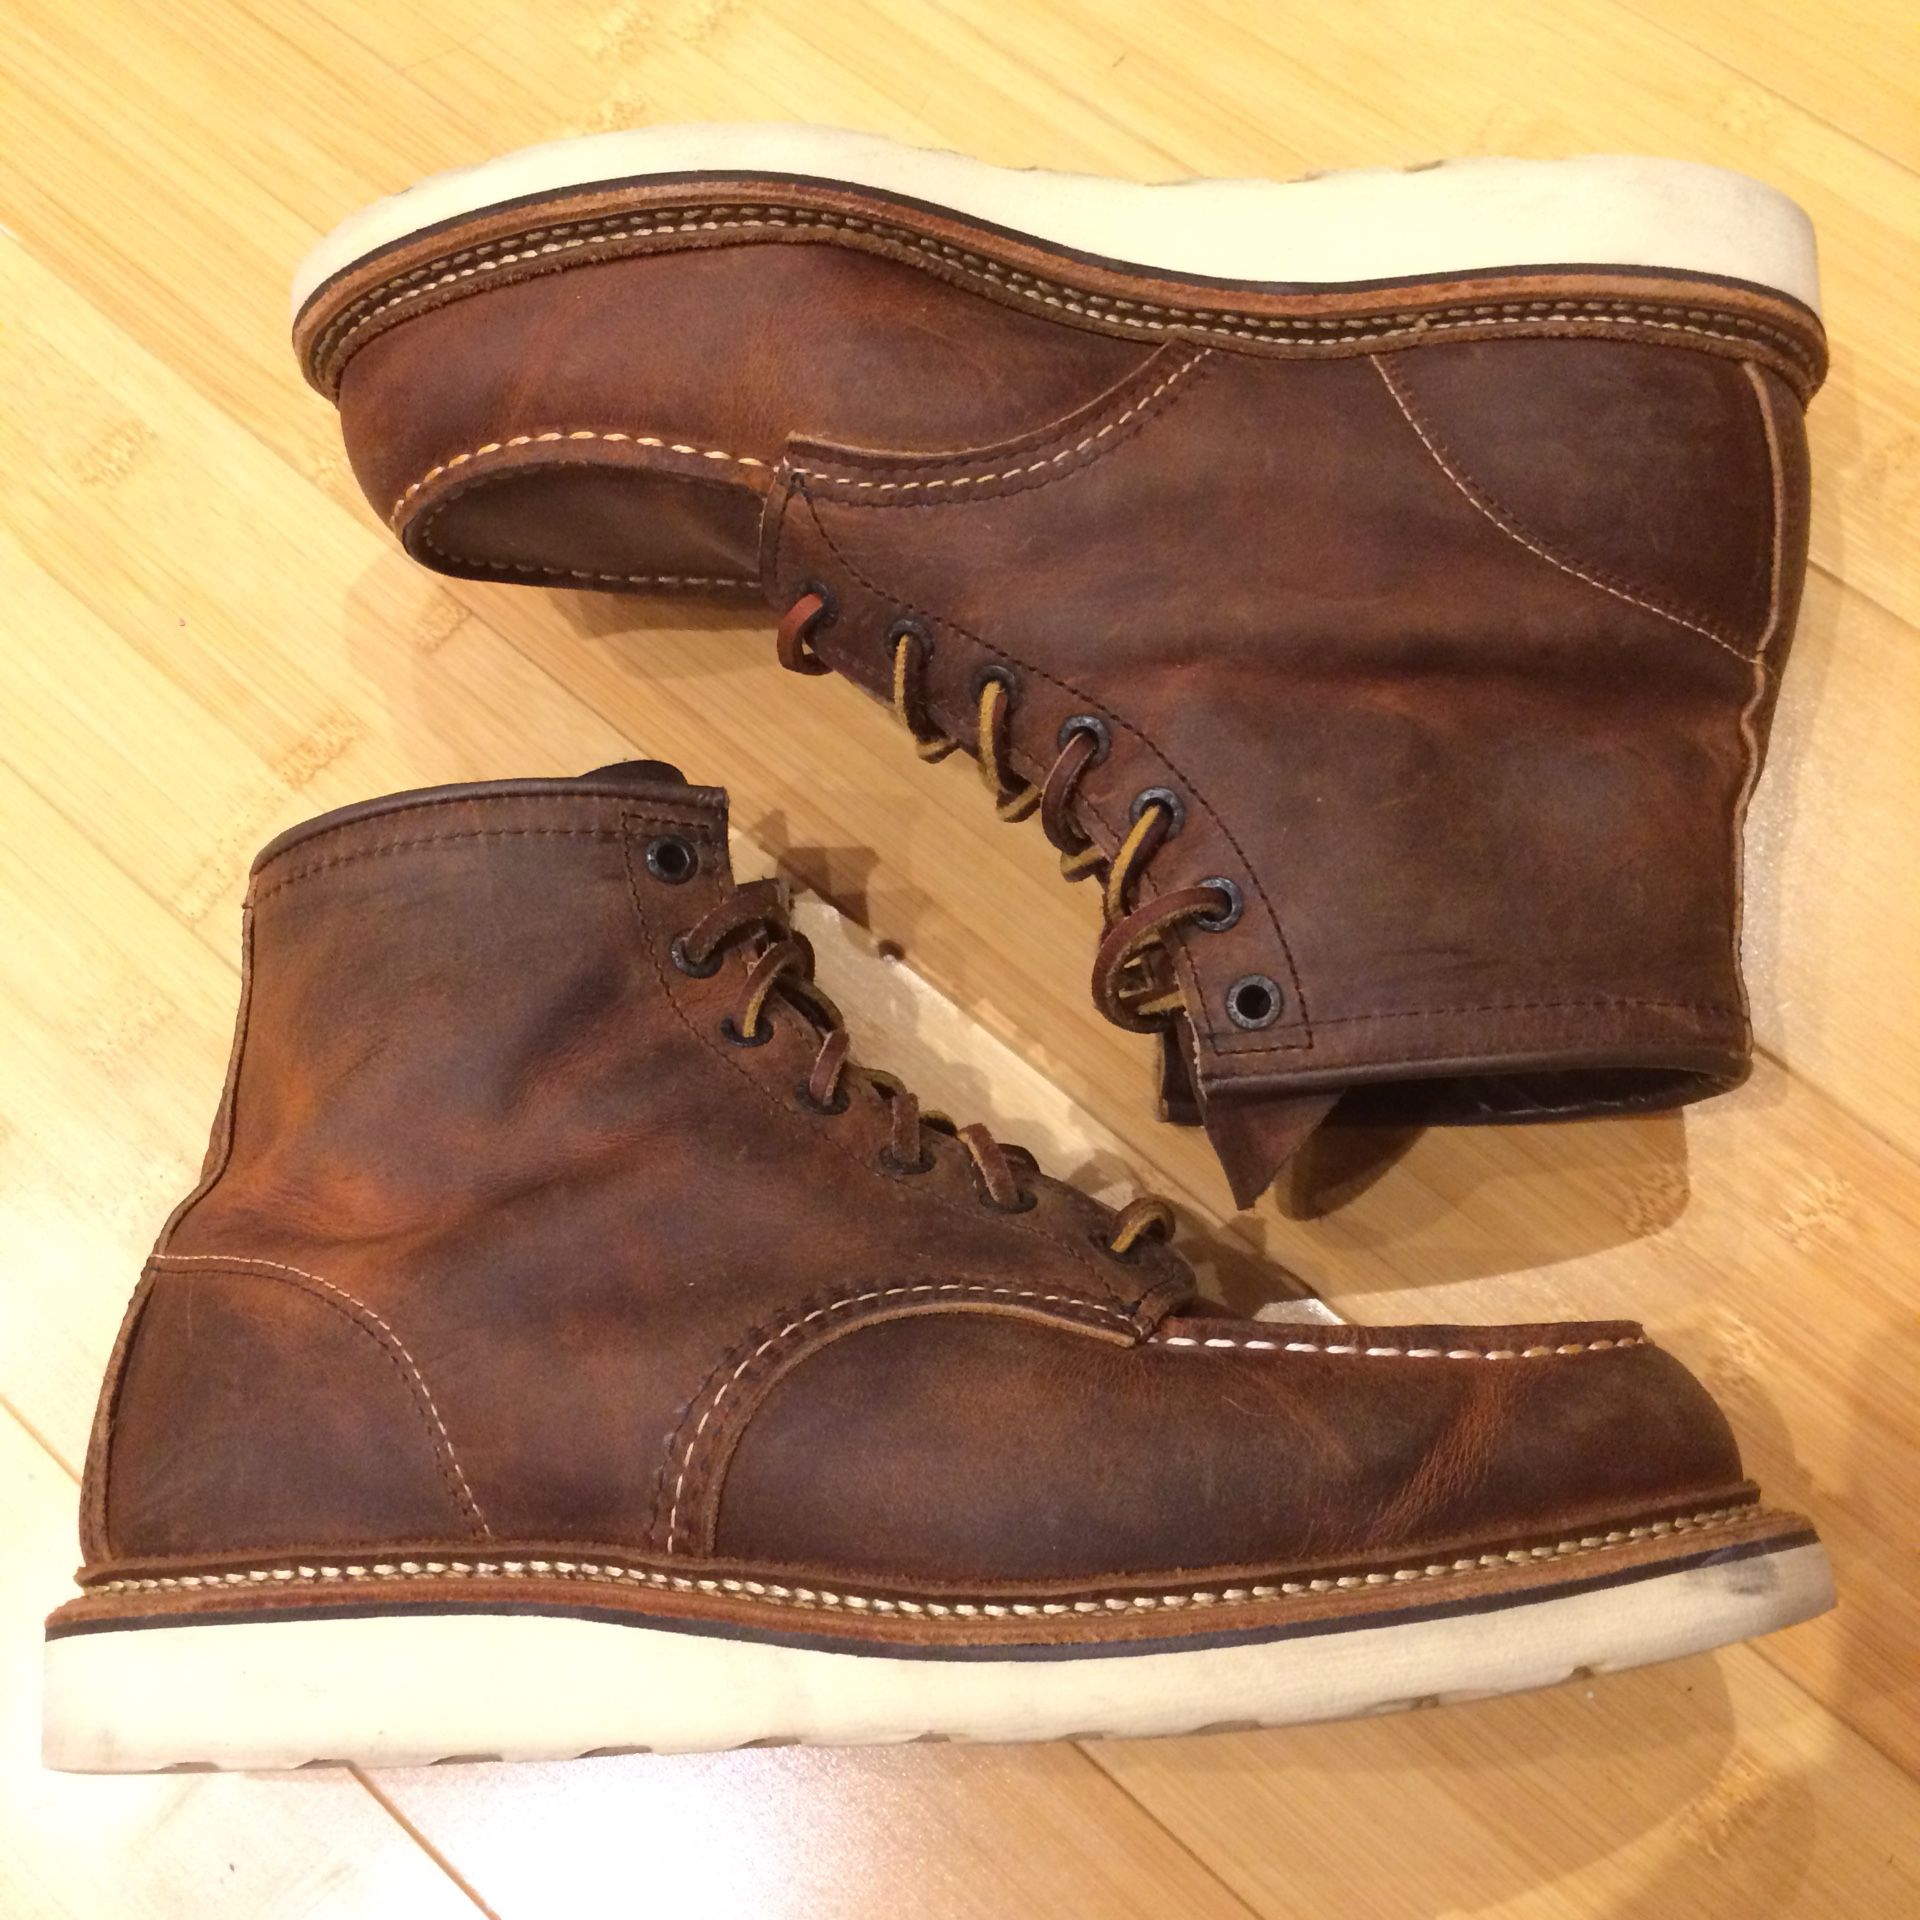 Red Wing 1907 Classic Moc Toe Boots - Copper